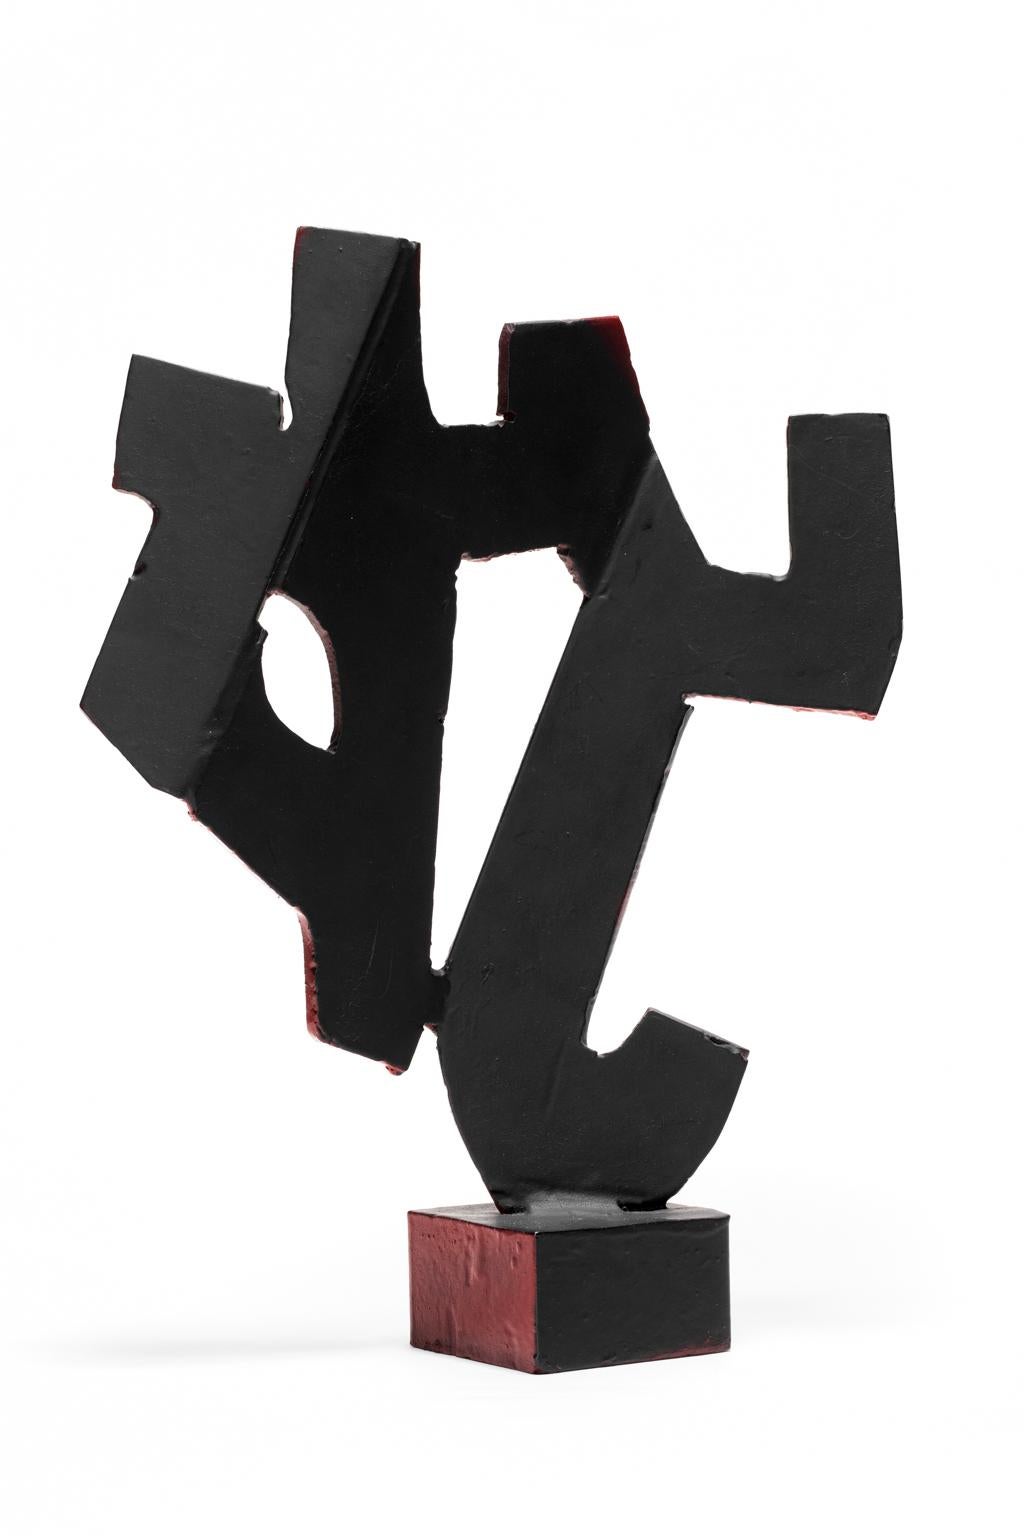 SALE ONE WEEK ONLY

UNTITLED is an abstract blackened steel sculpture that has a continuous lively movement. The positioning of the heavy metal is suggestive of dance. There are similarities to the sculptors, Robert Sestok and Tony Smith, who both